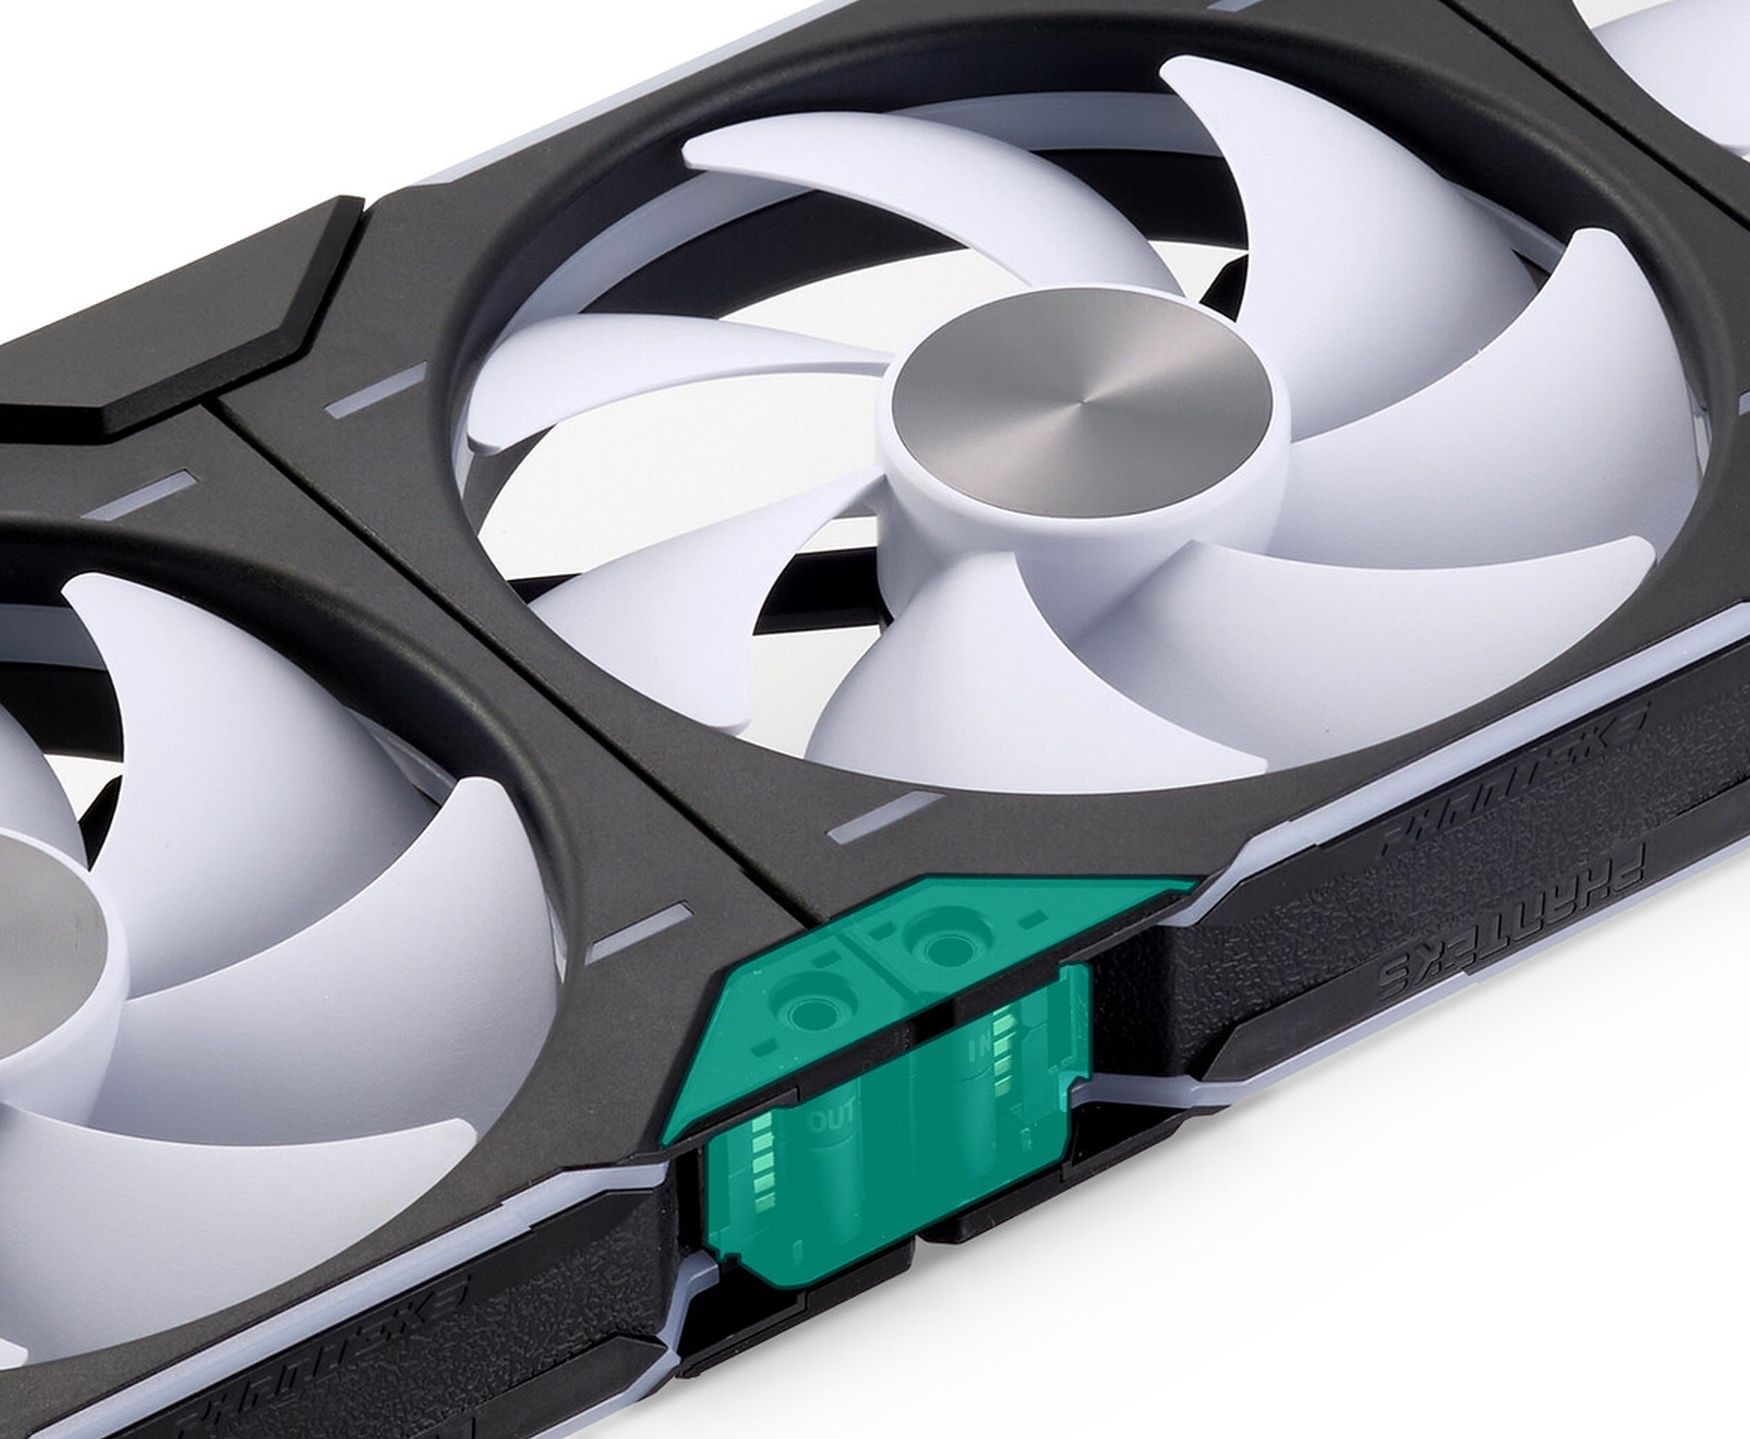 The new Phanteks D30 fan: Extra thickness now in 140 mm